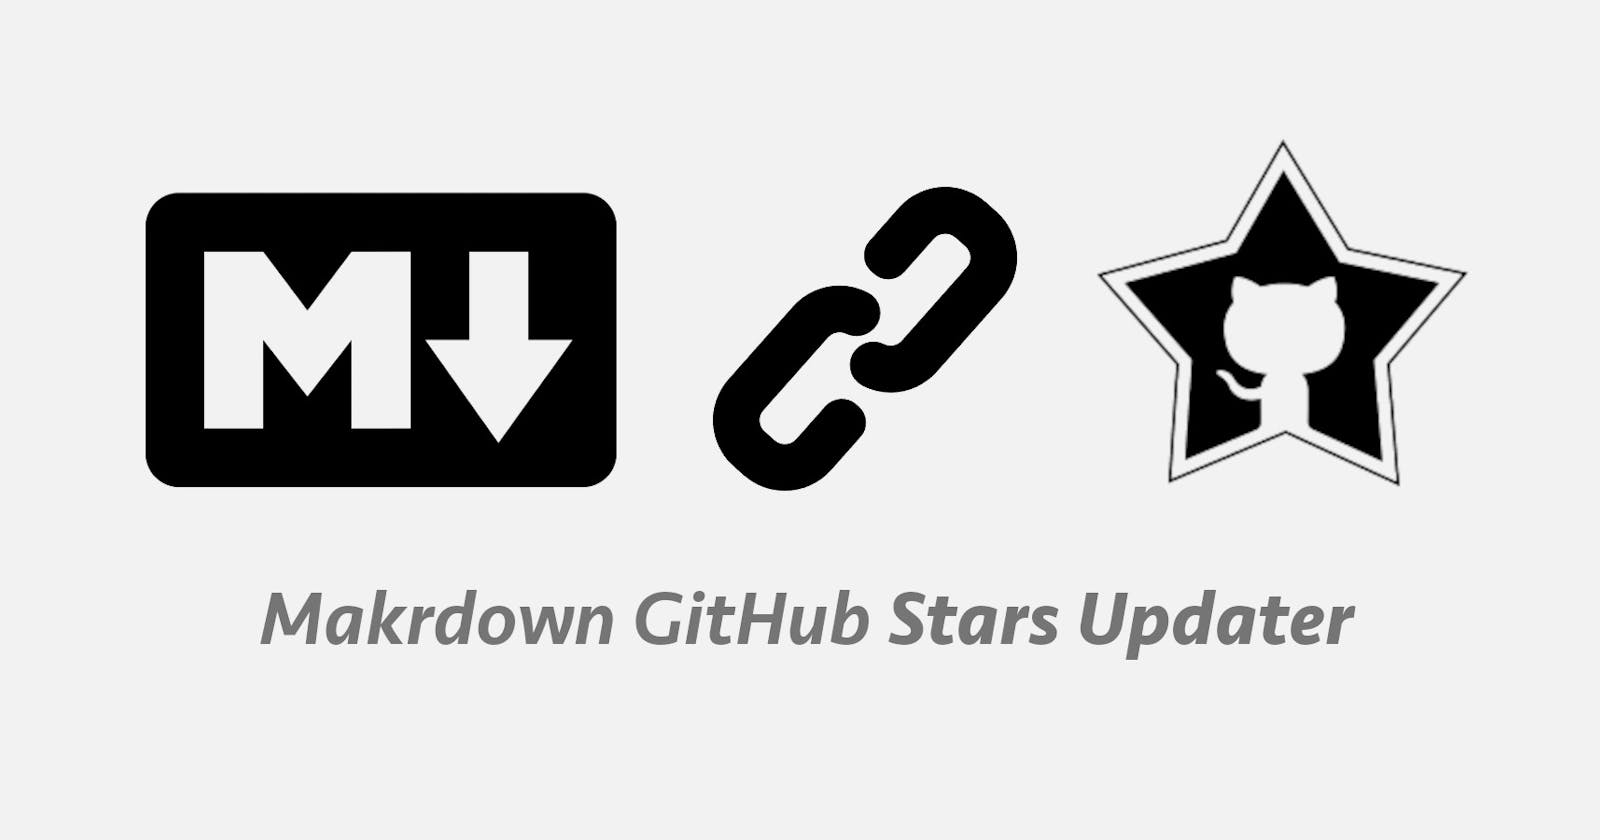 Introducing Markdown GitHub Stars Updater